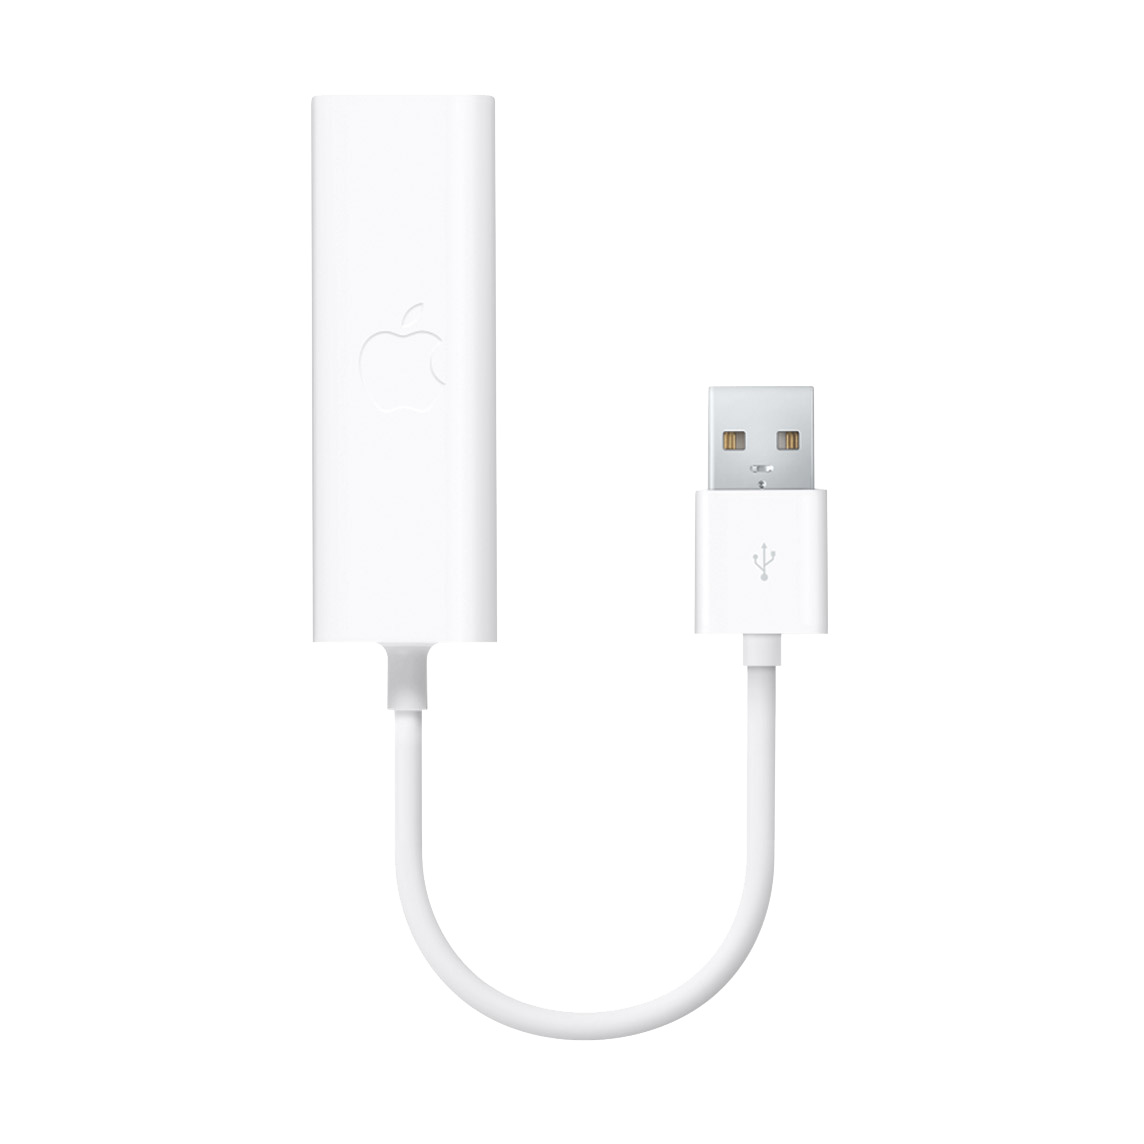 APPLE USB TO ETHERNET ADAPTER